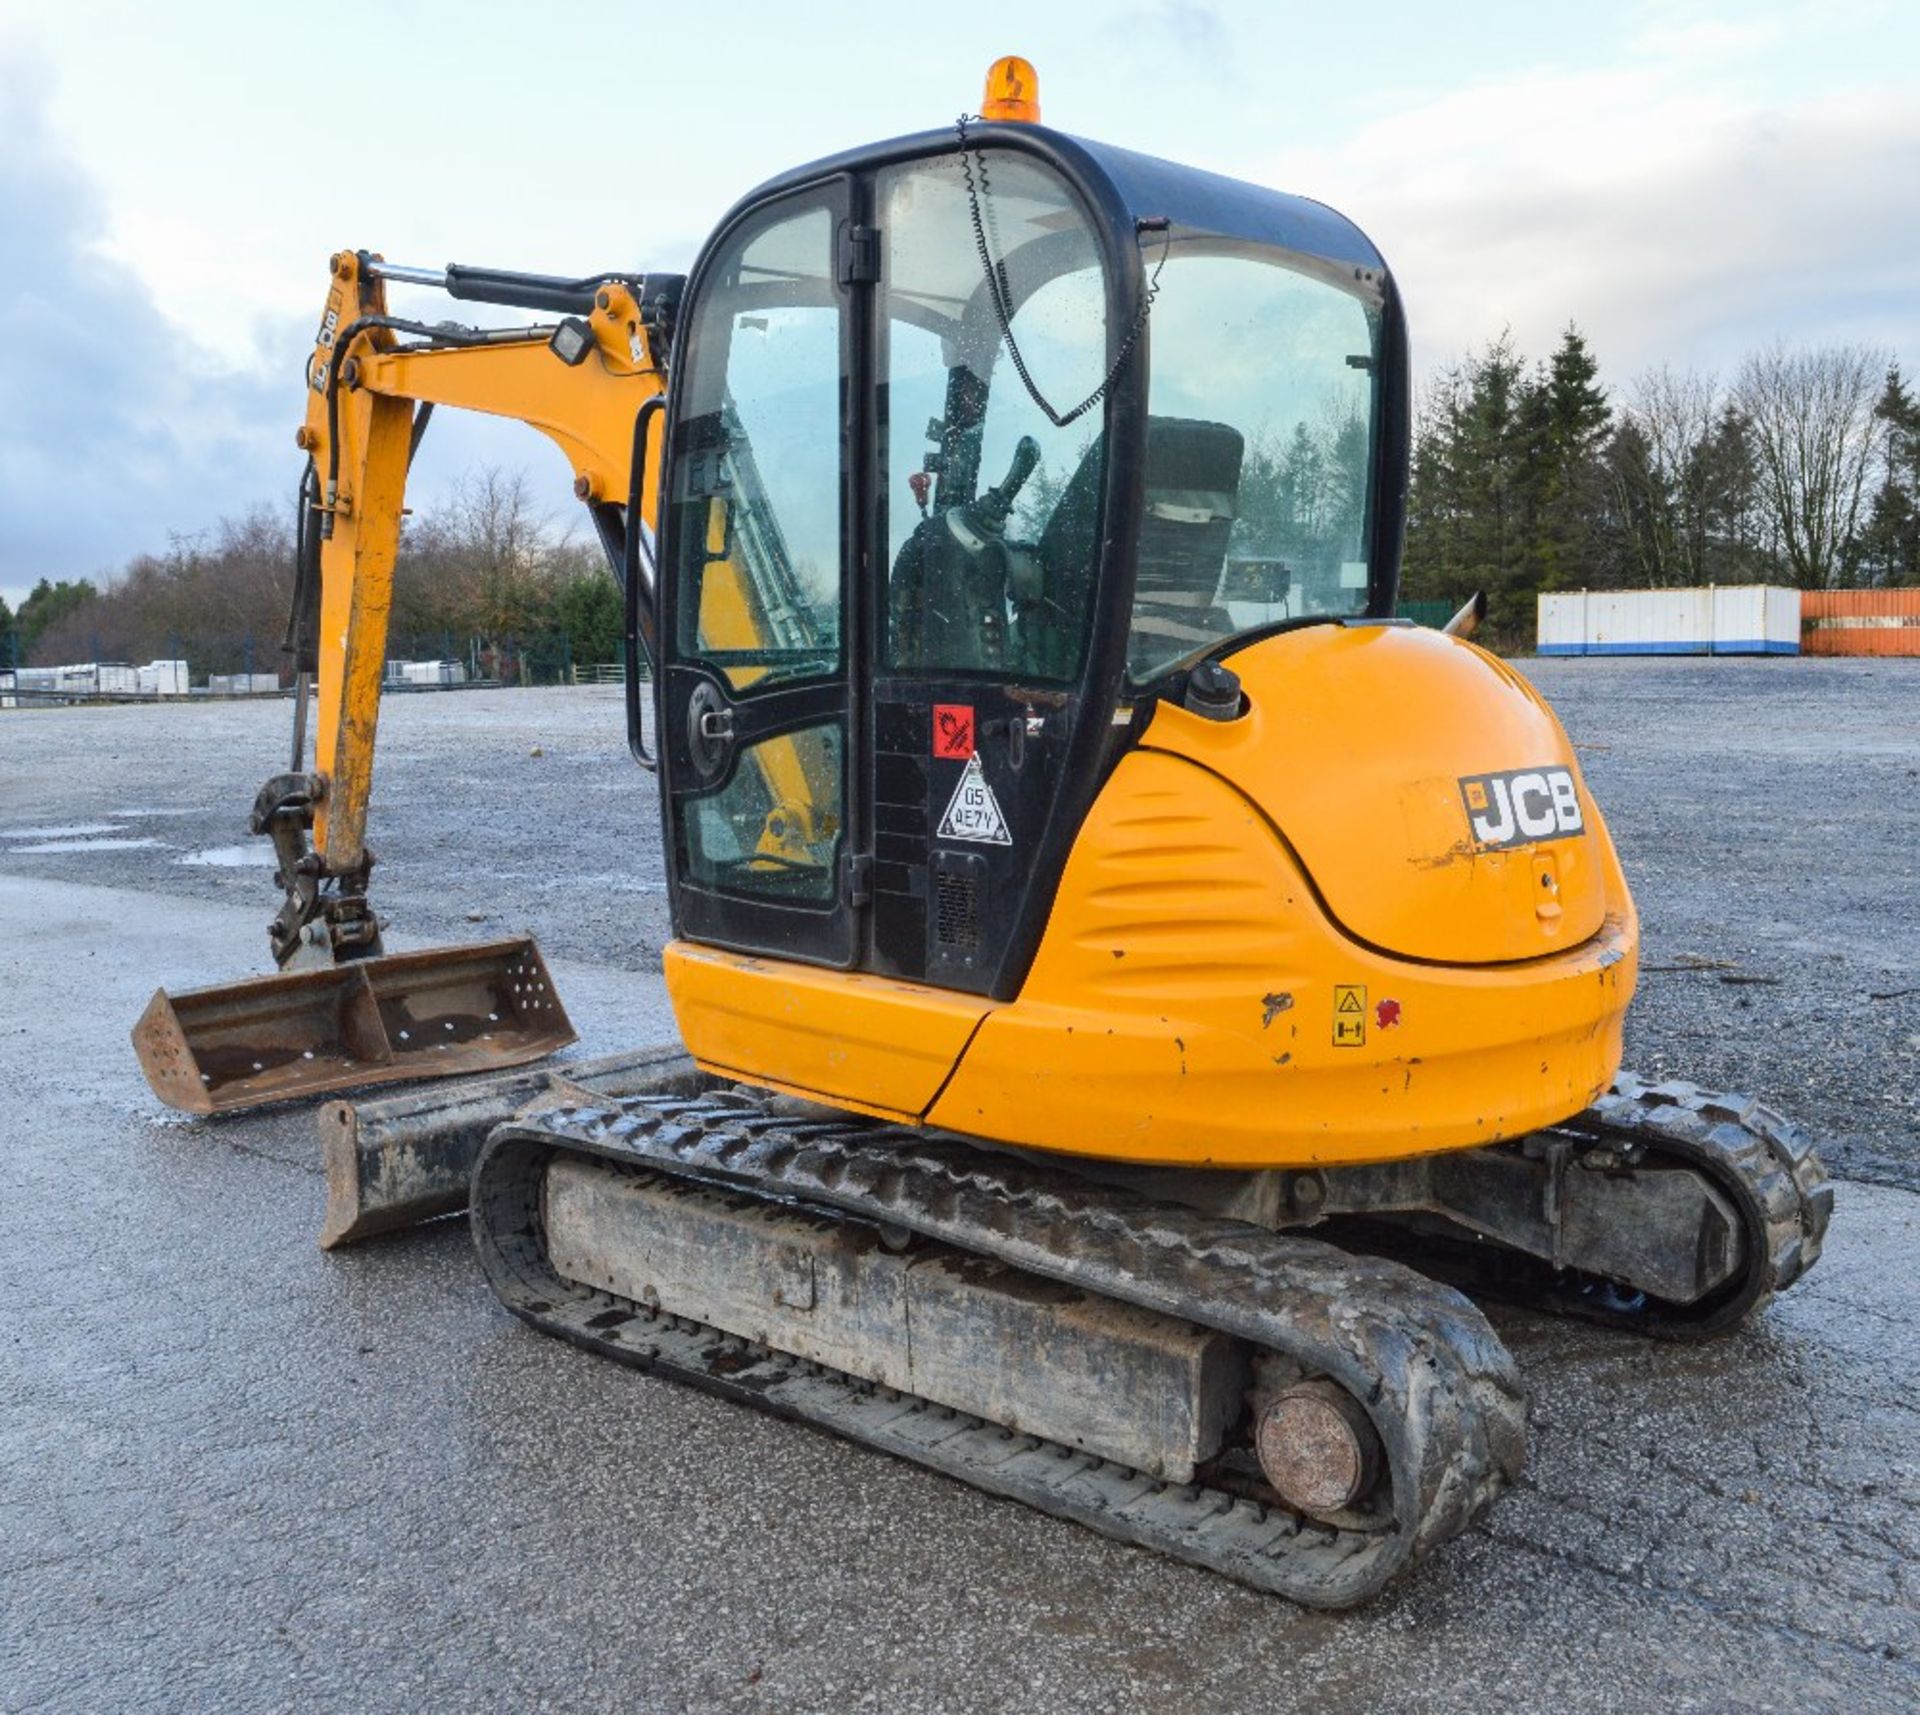 JCB 8050 RTS 5 tonne reduced tail swing rubber tracked mini excavator
Year: 2011
S/N: 1741659 - Image 2 of 12